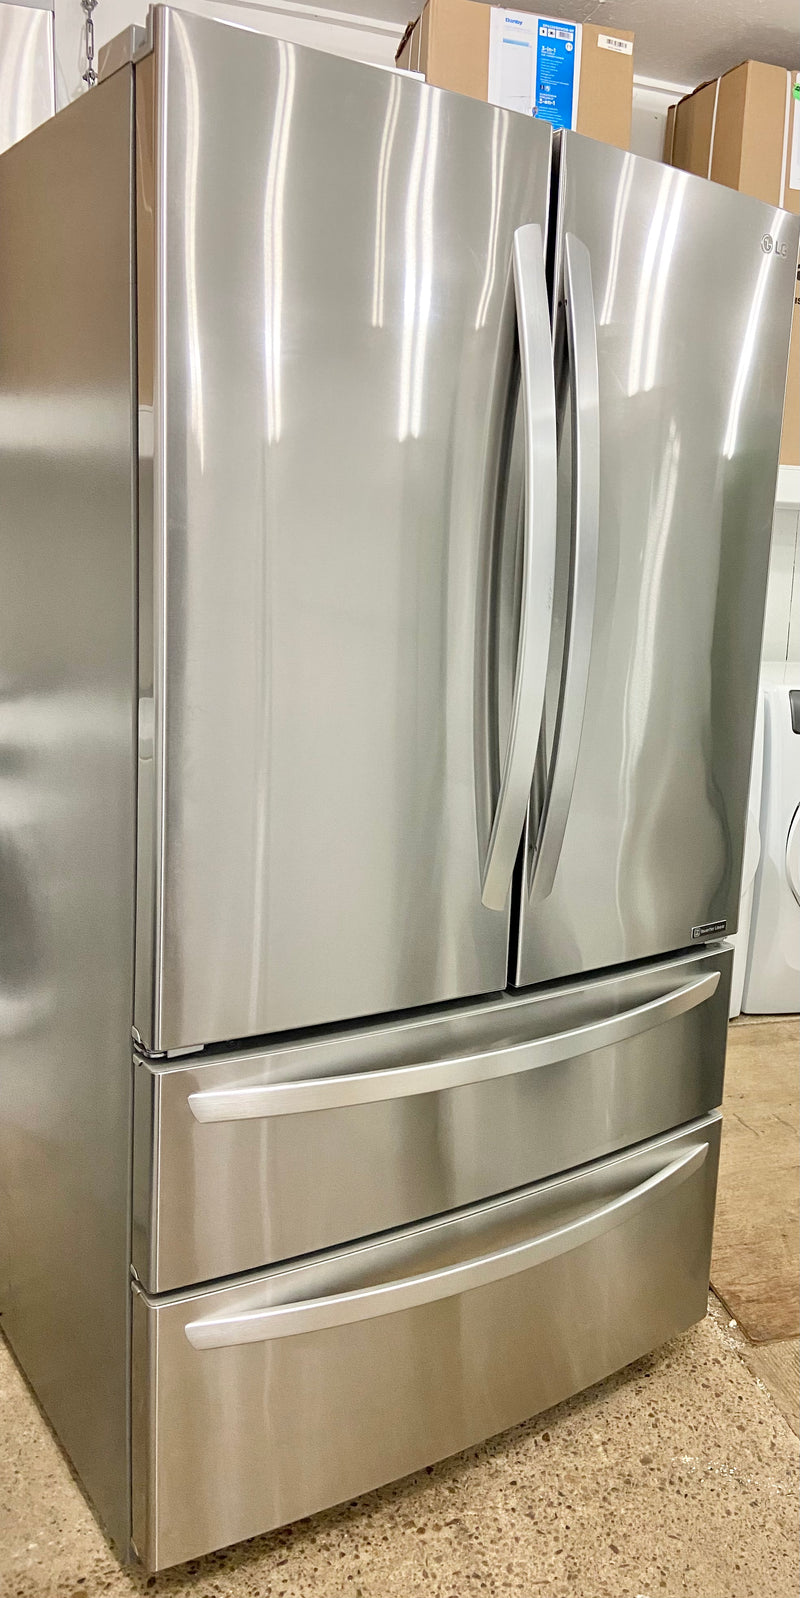 LG 36'' Wide Stainless Steel Four Door Fridge with Water and Ice Maker, Free 60 Day Warranty